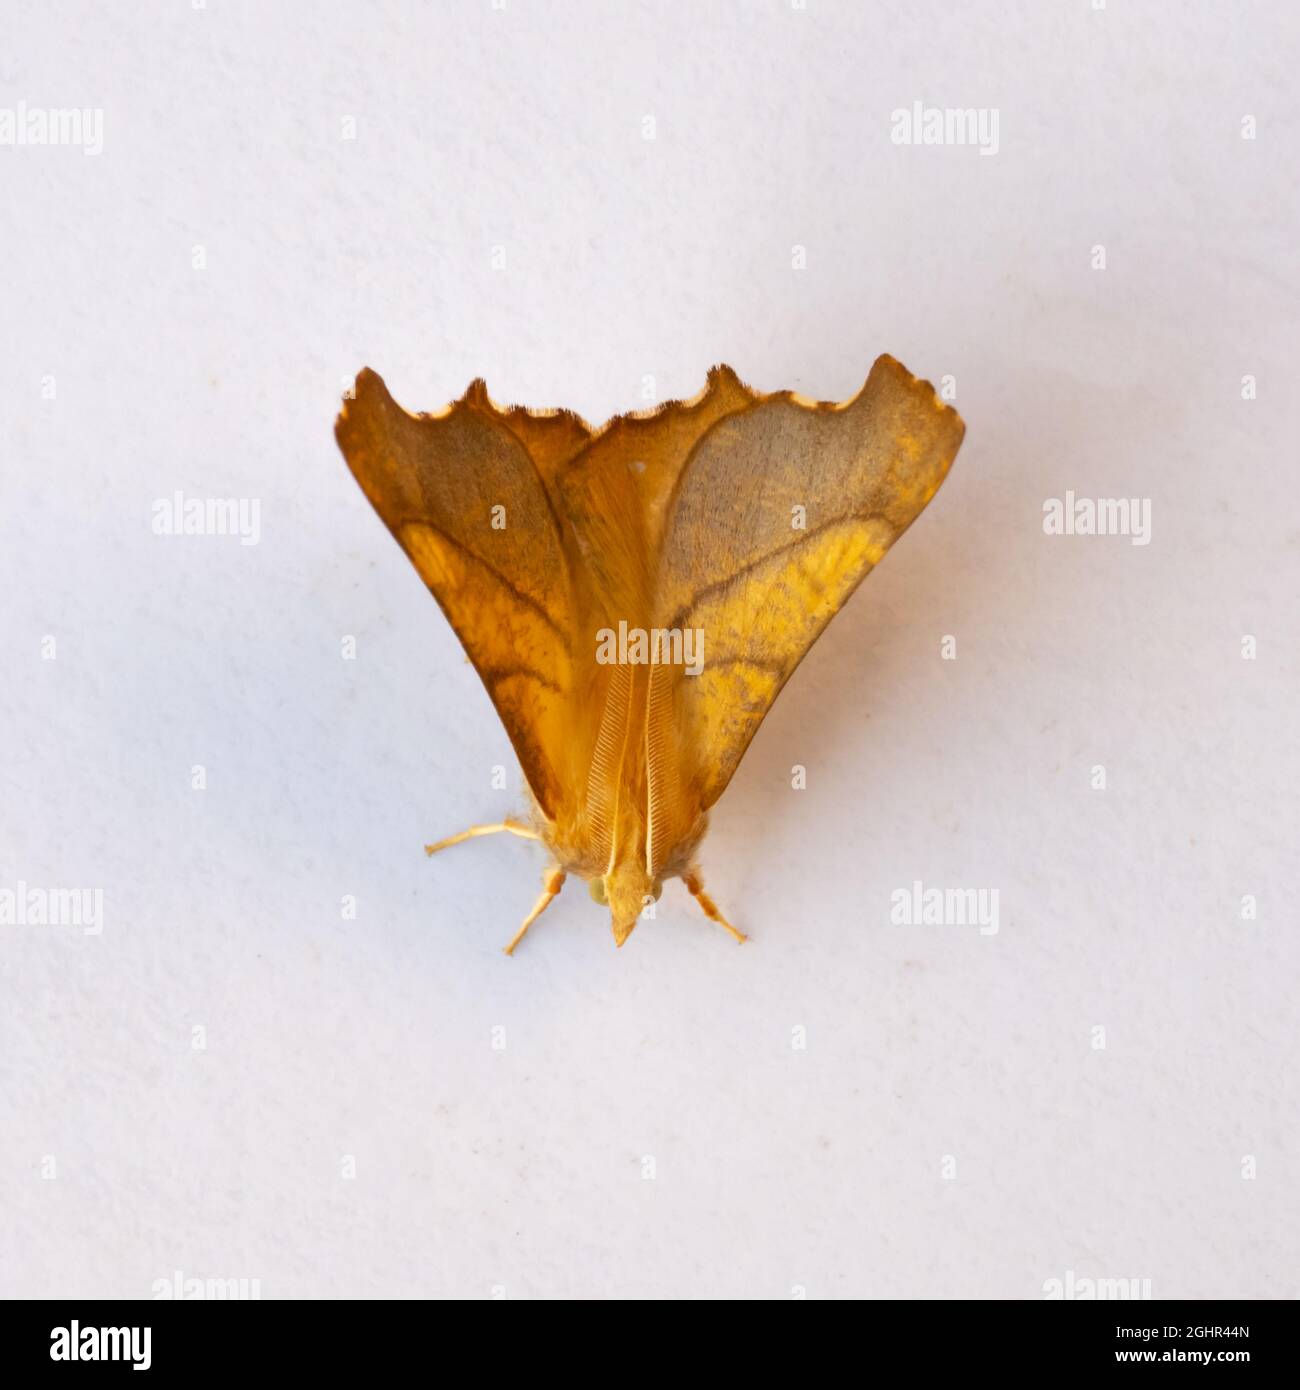 Ennomos fuscantaria, the Dusky Thorn Moth, at rest on a white background. Stock Photo